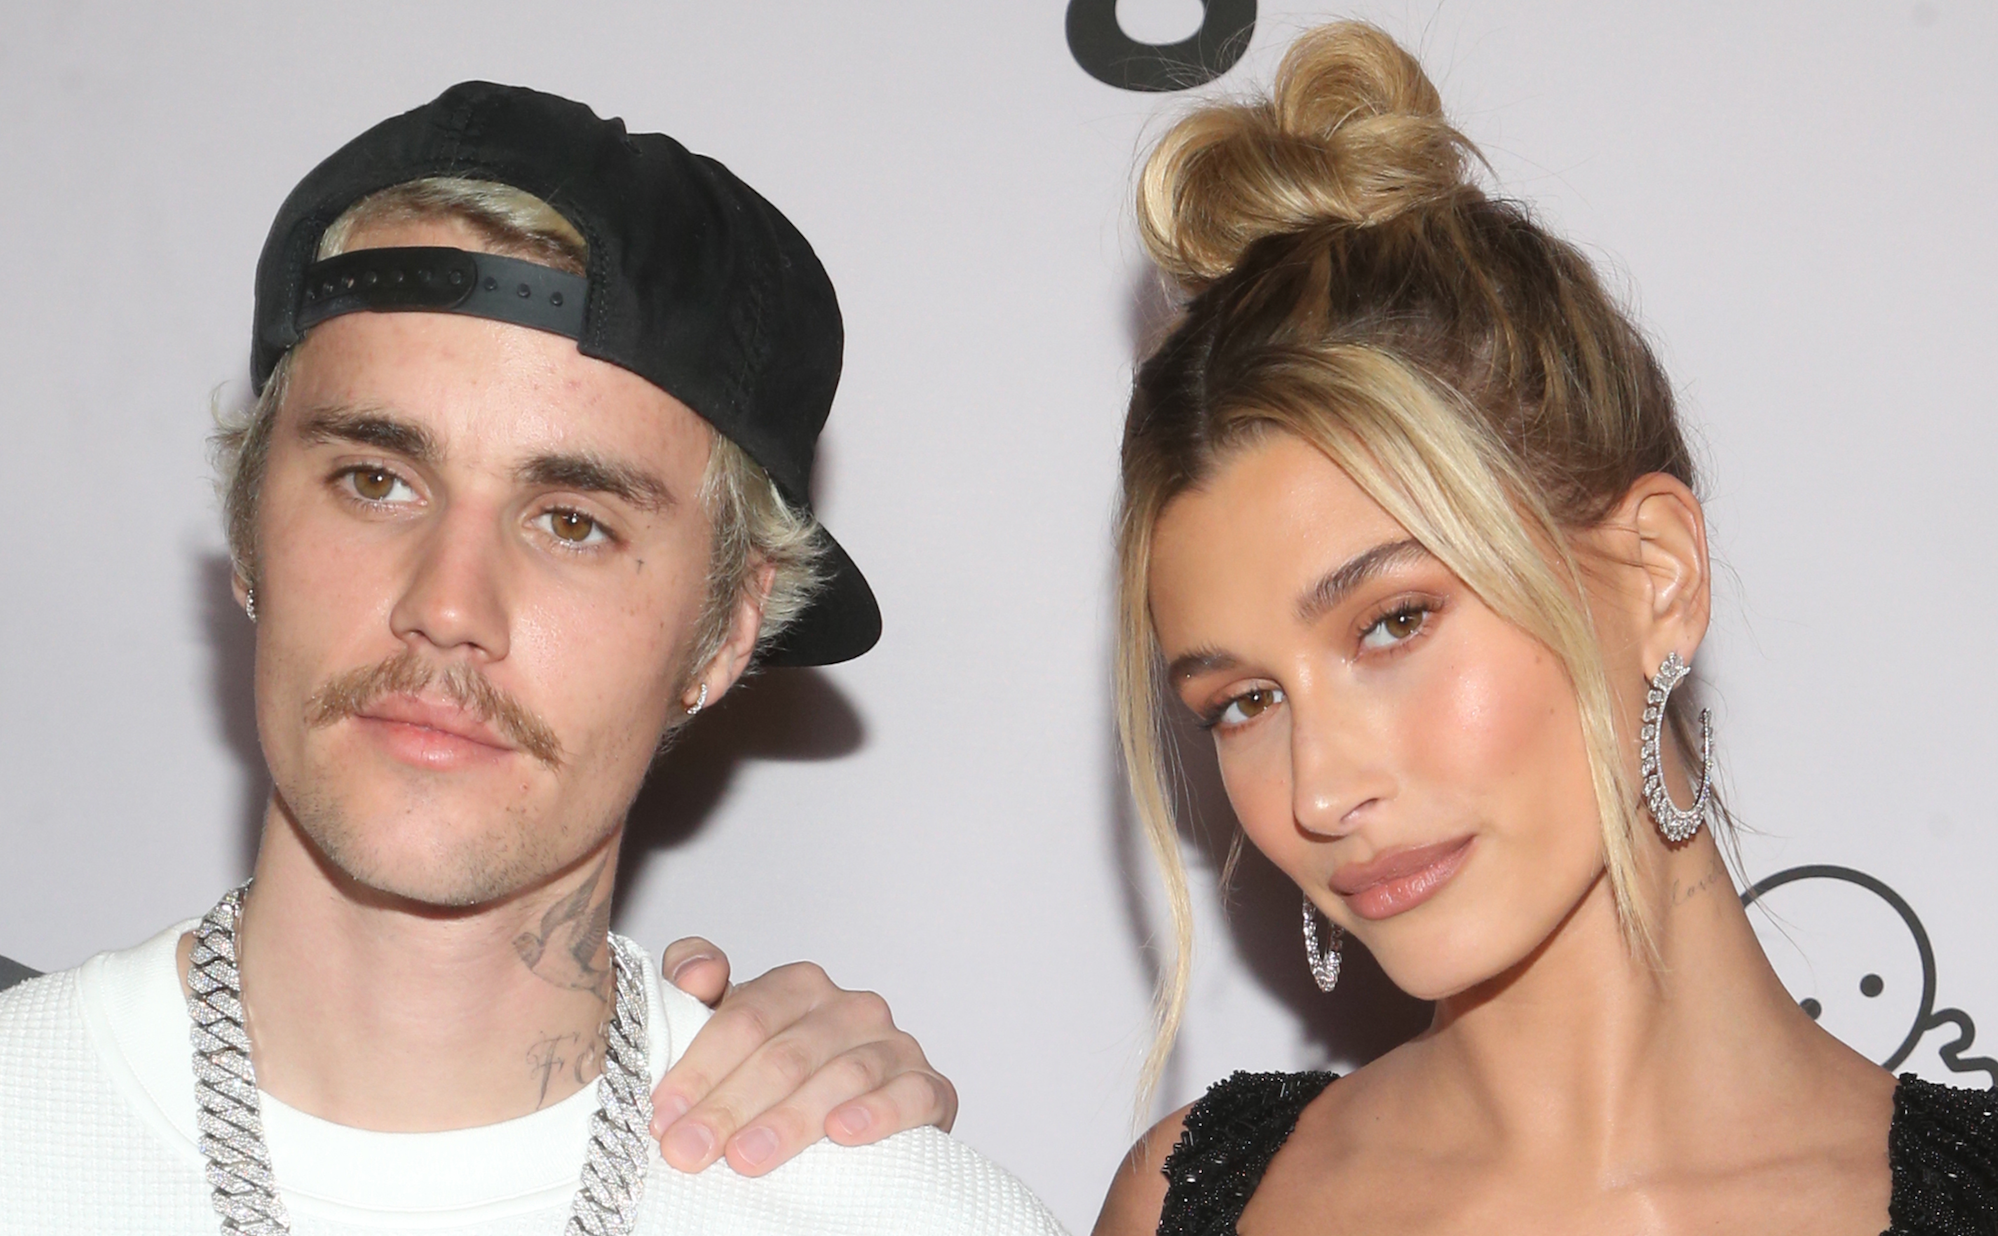 Justin Bieber Buys $16 Million Mansion Next To Kylie Jenner Amid Rumors He’s Divorcing Hailey